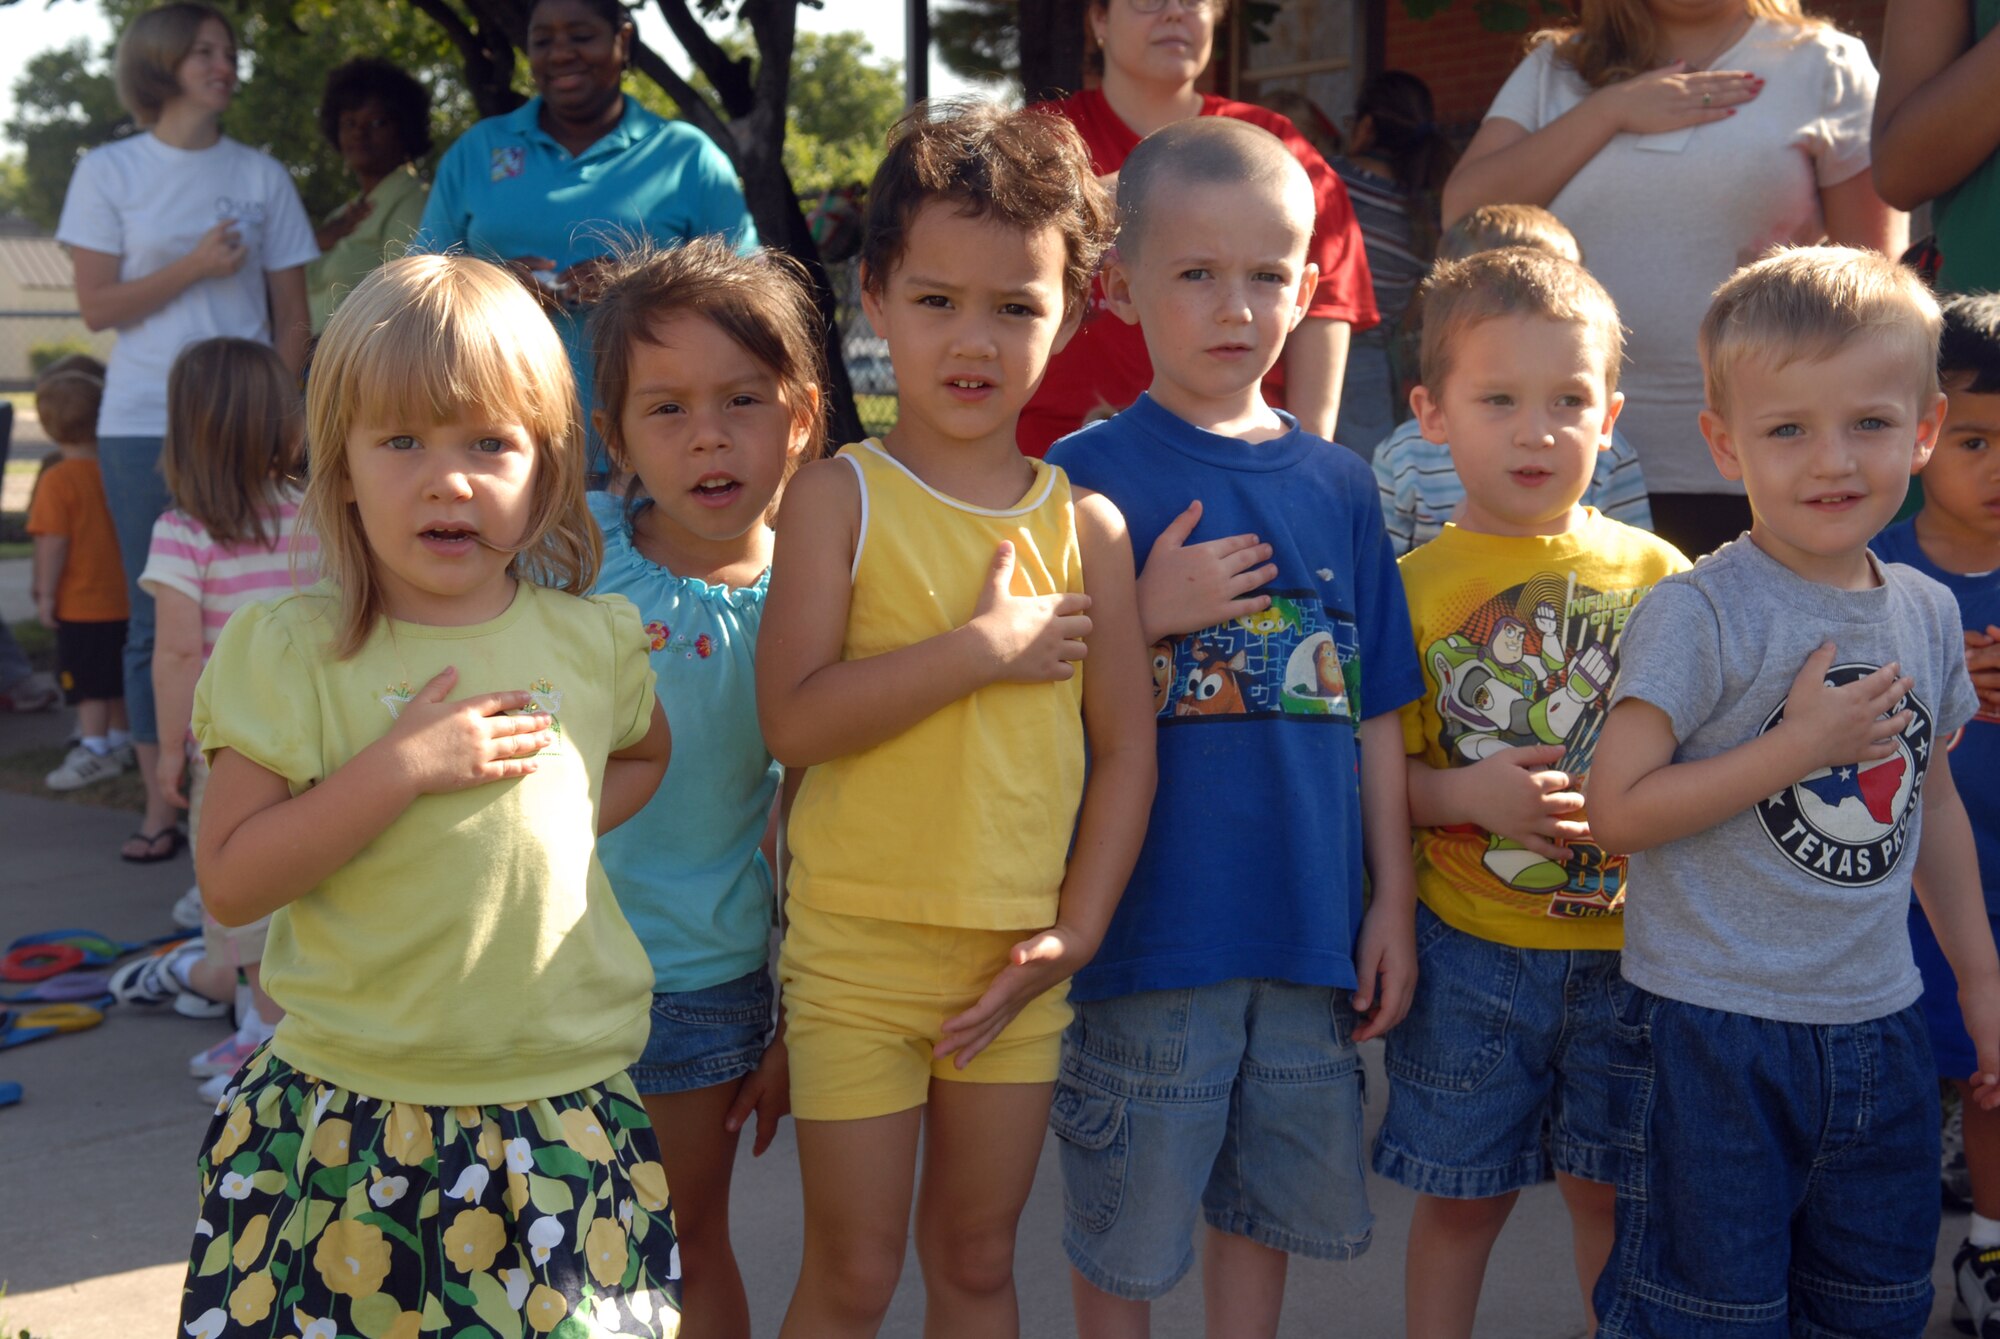 Participants in the Goodfellow Air Force Base Child Development Center’s Little Olympics recite the Pledge of Allegiance during opening ceremonies Aug. 10. (U.S. Air Force photo by Airman 1st Class Kamaile Chan)